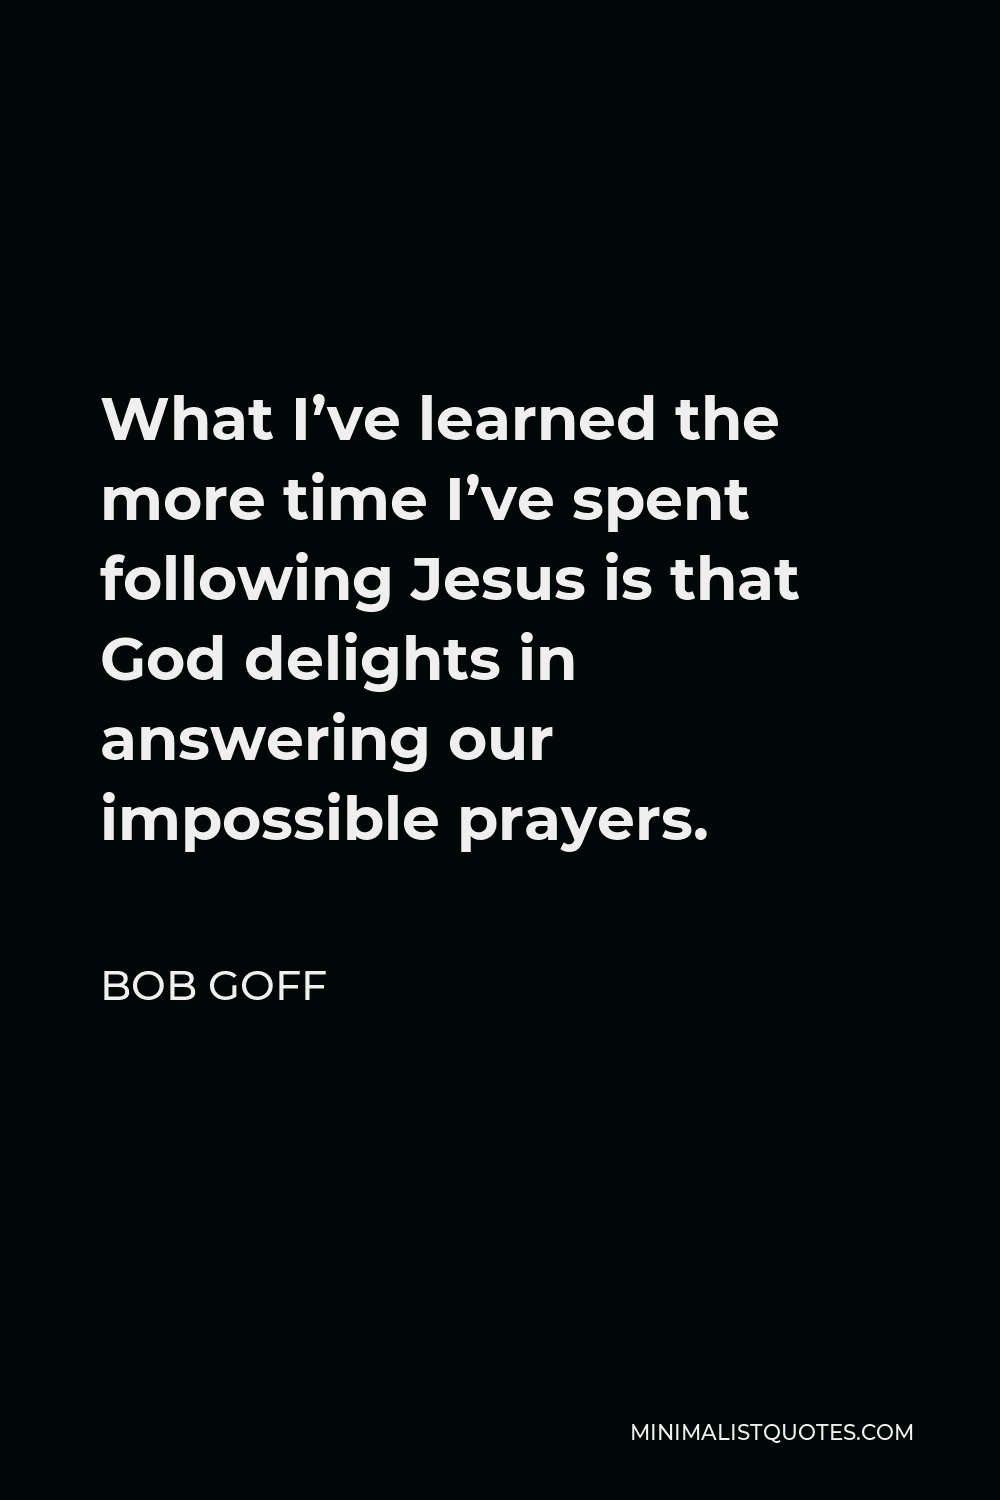 Bob Goff Quote - What I’ve learned the more time I’ve spent following Jesus is that God delights in answering our impossible prayers.